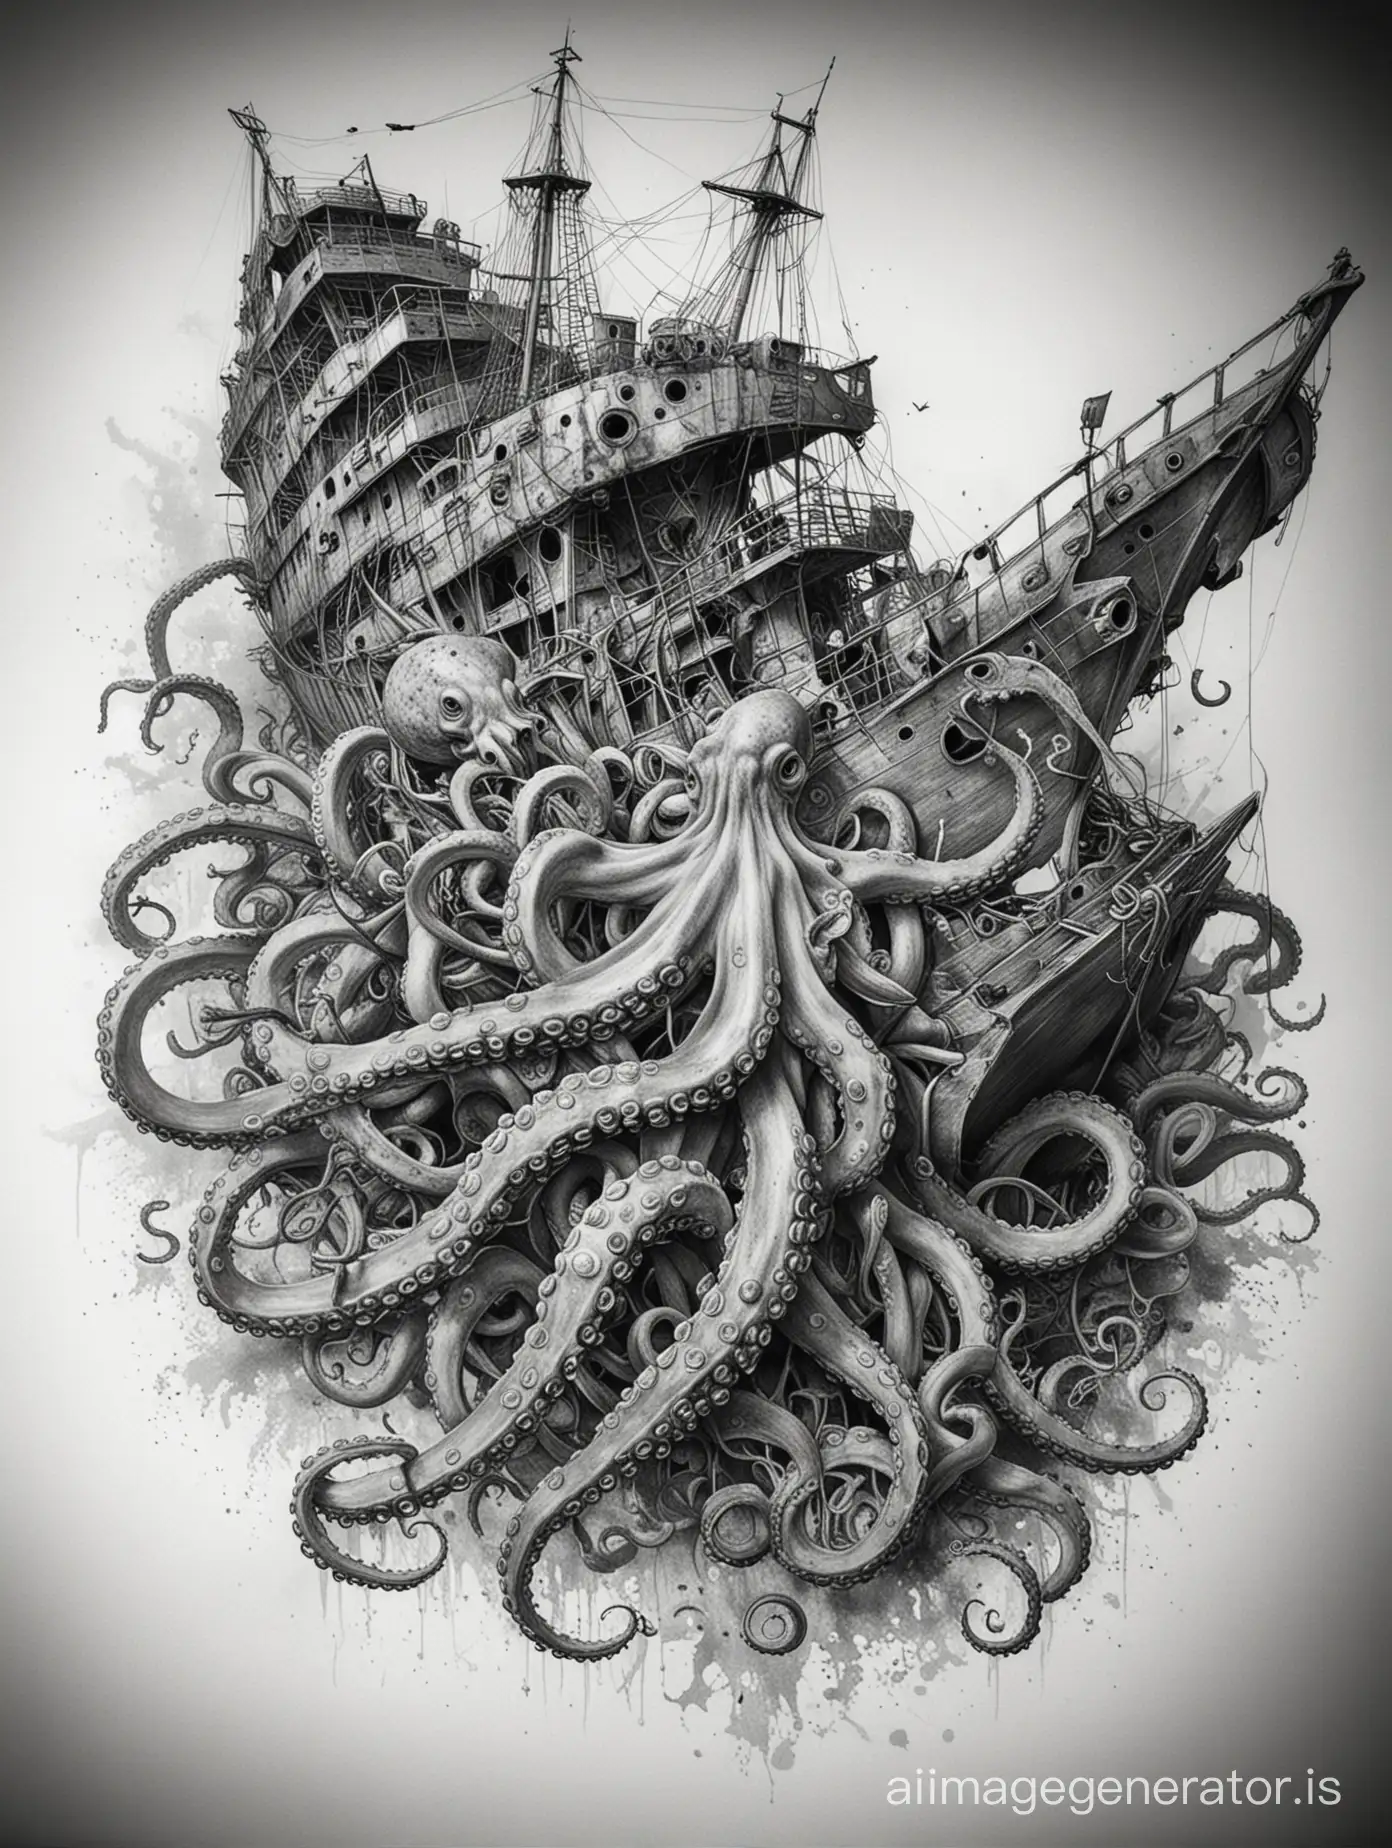 Pencil sketch of Octopus squashed underneath 
a ship wreck, ultra realistic drawing style